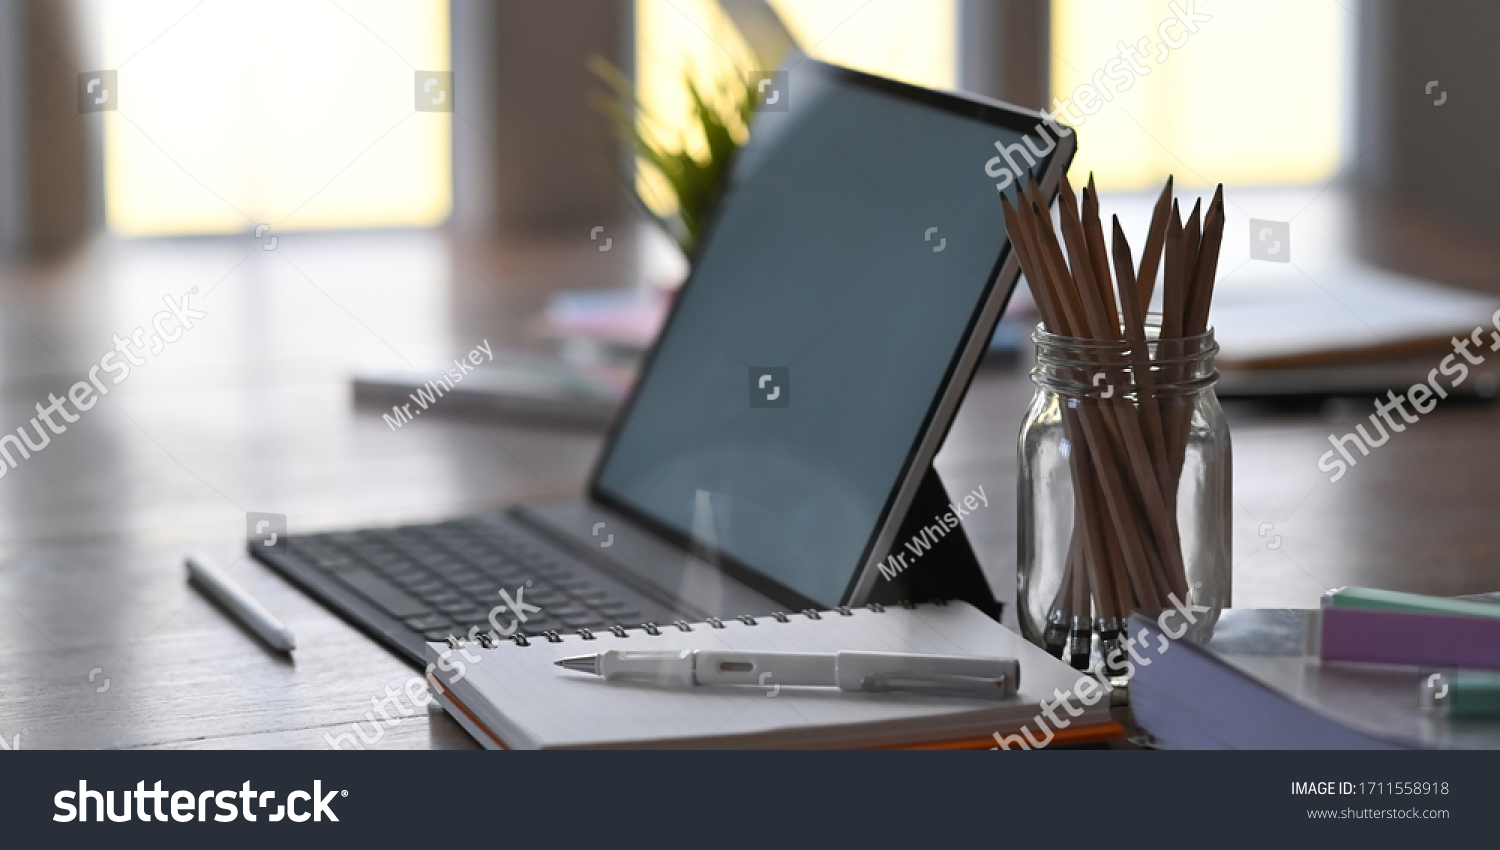 Office equipment on home working desk with tablet, pencil, pen and notebook. #1711558918